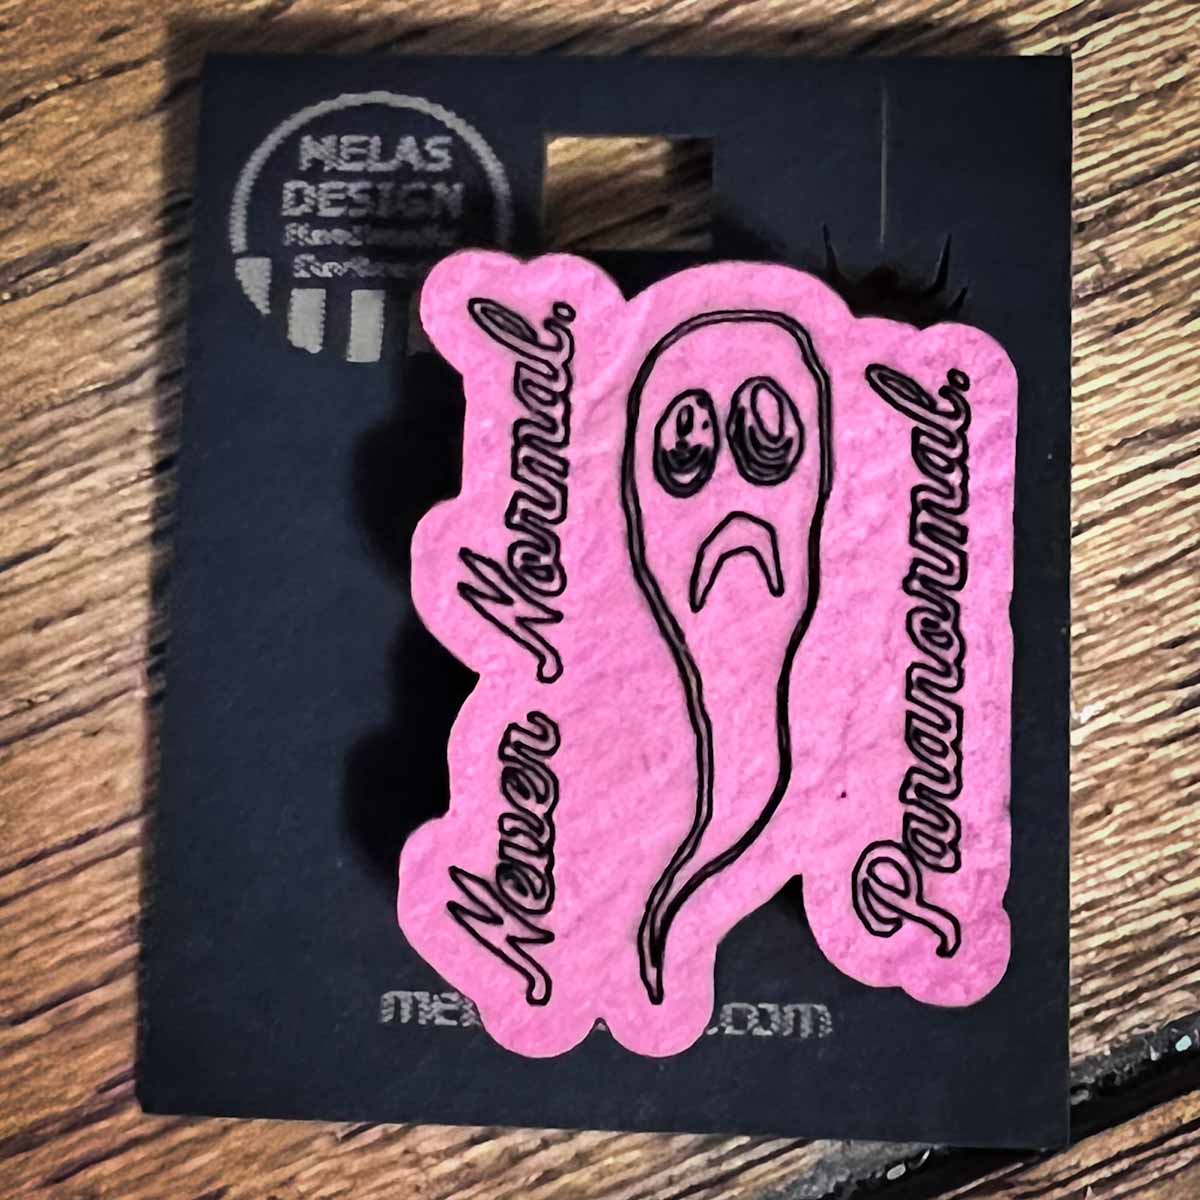 Never Normal Paranormal Ghost Pin; funny; Halloween; backpack pin; purse pin; jacket pin; ghost gift; pinback button; Melasdesign